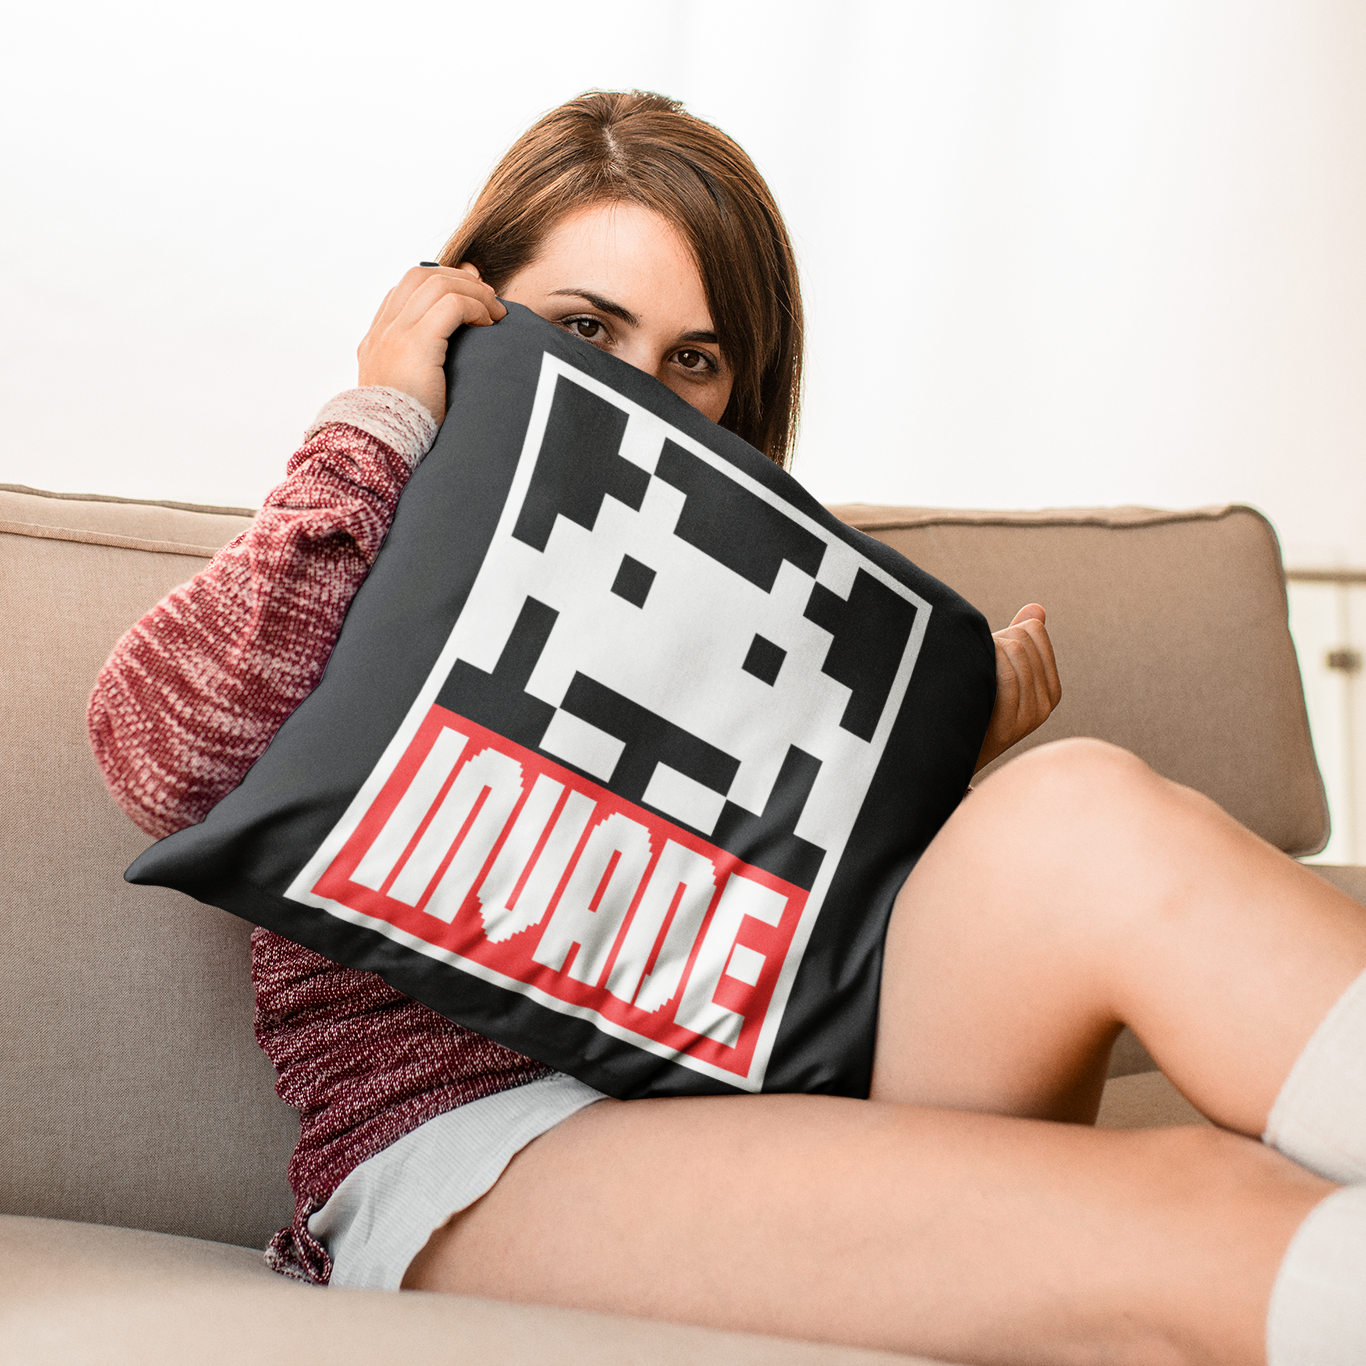 Space Invaders Pillow Gaming Merch